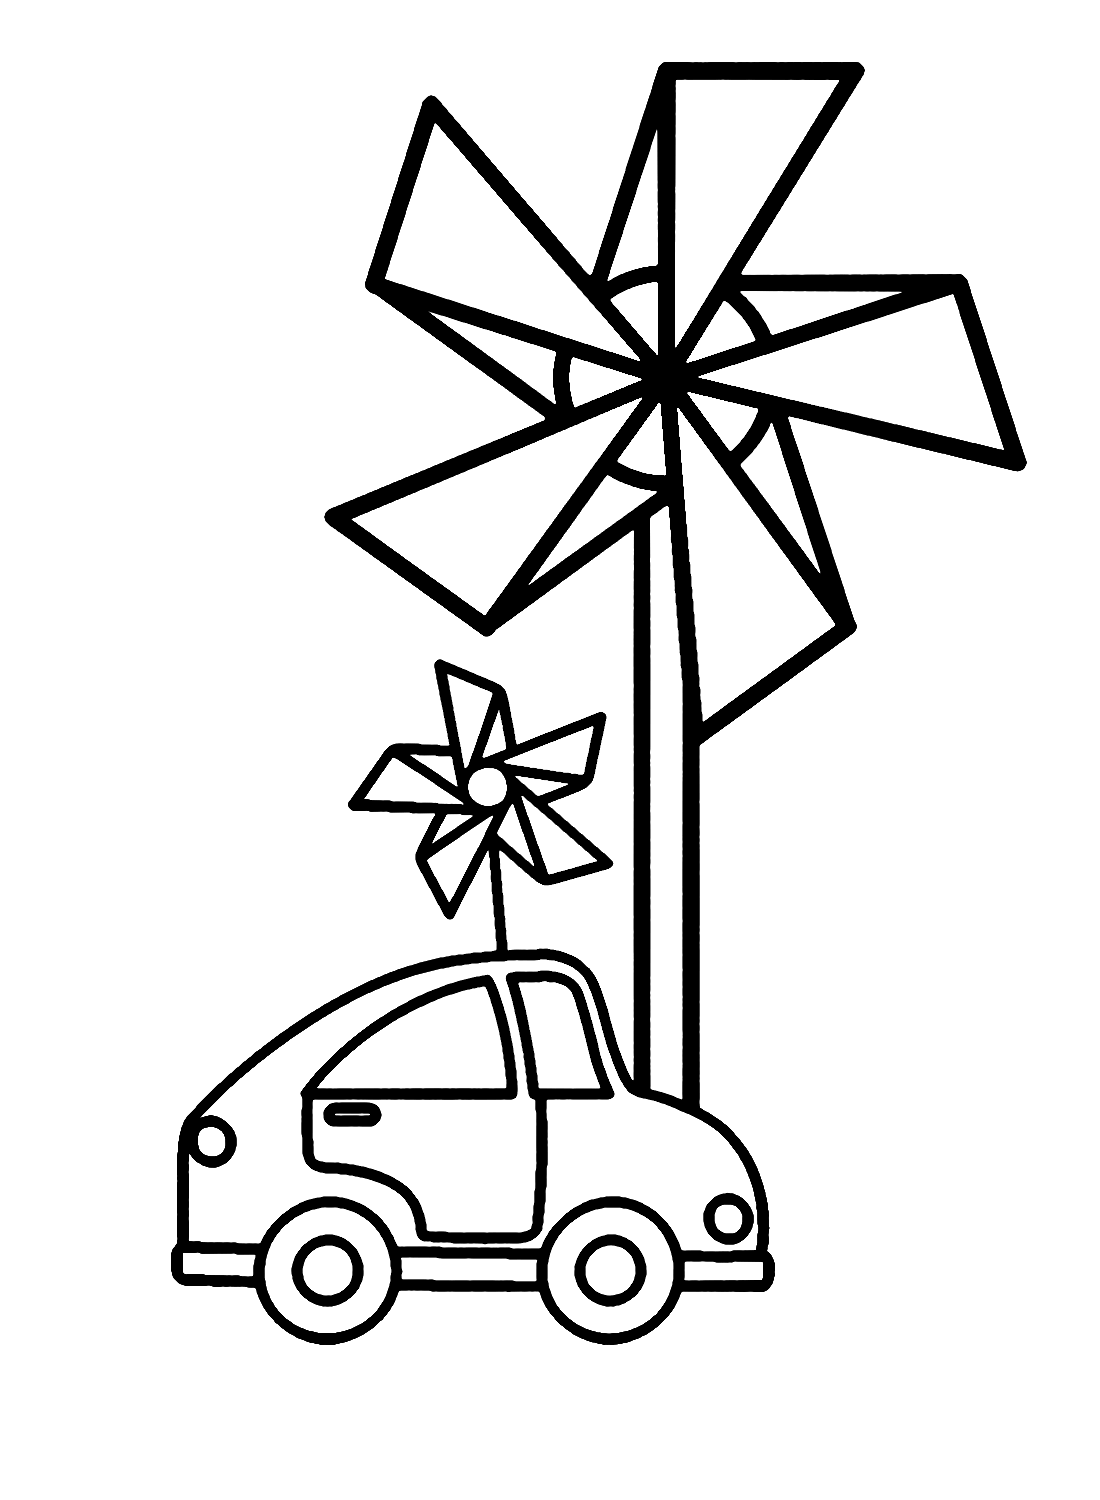 Car with Pinwheel Toy Coloring Page